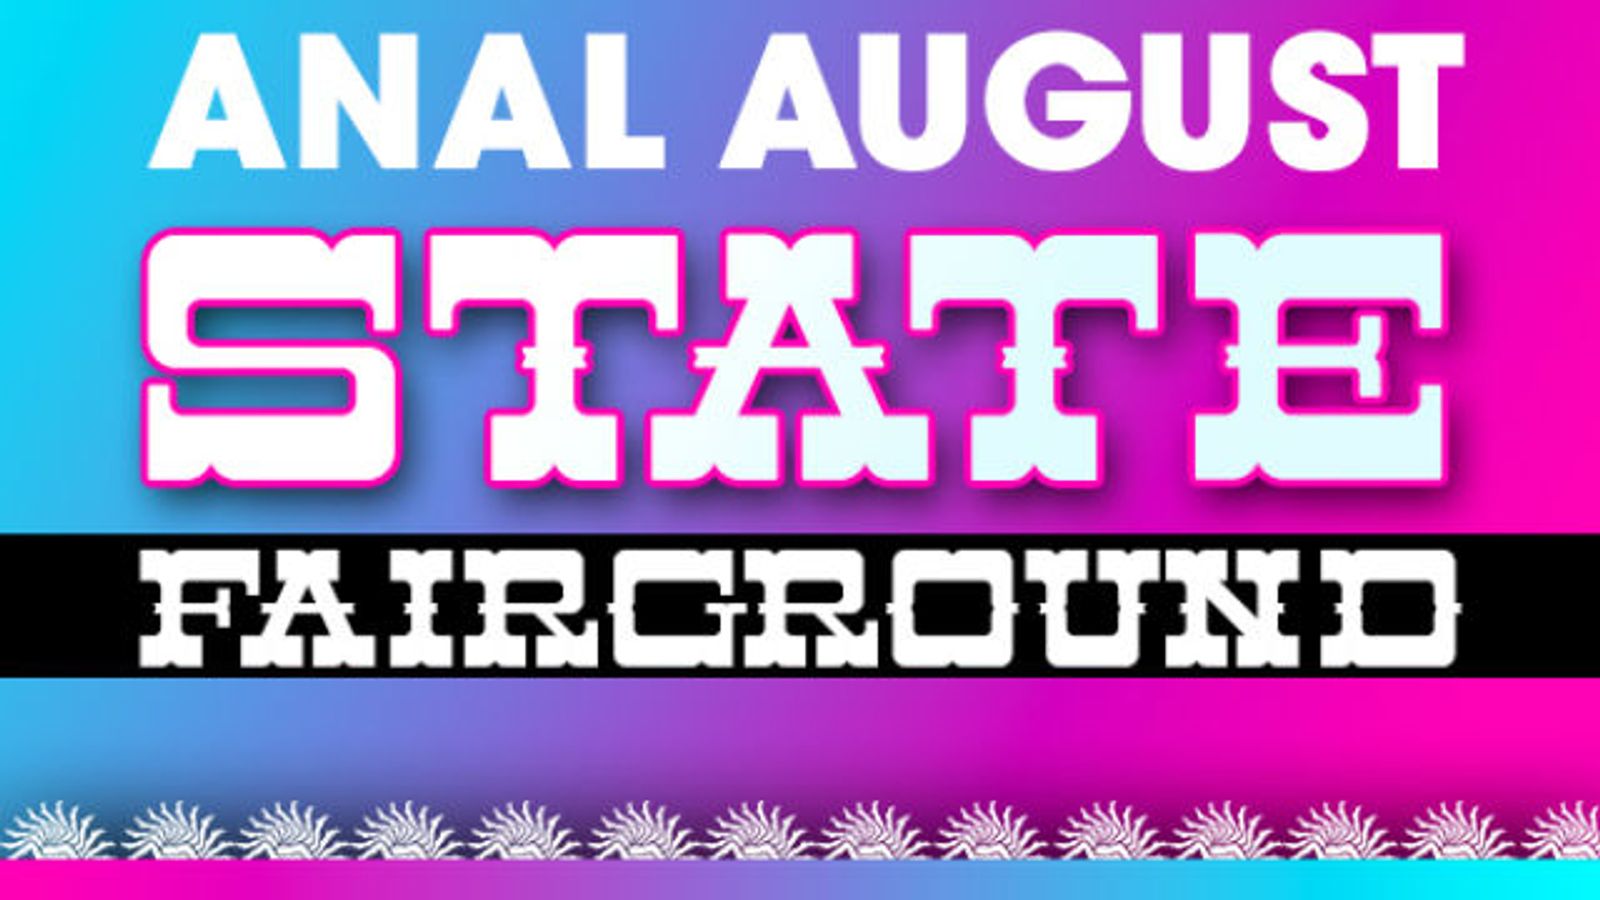 Pleasure Chest to Host Anal August State Fairground at Upper East Side Location